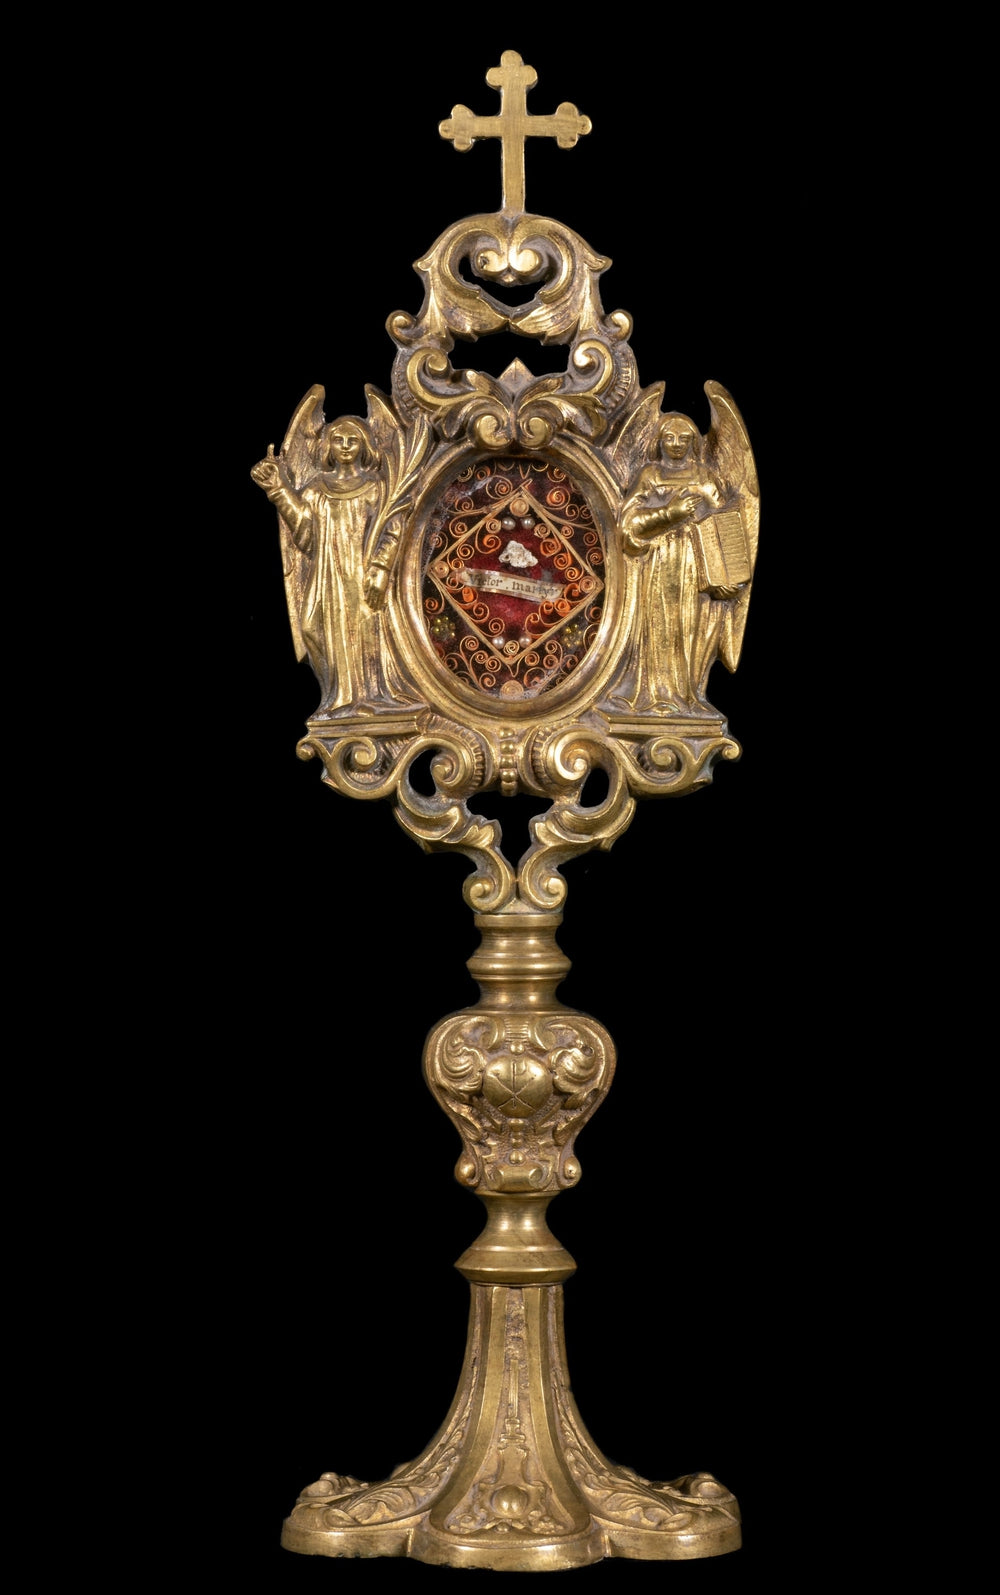 RELIQUARY MONSTRANCE, FIRST CLASS RELIC EX OSSIBUS OF SAINT VICTOR MARTYR - RELICS